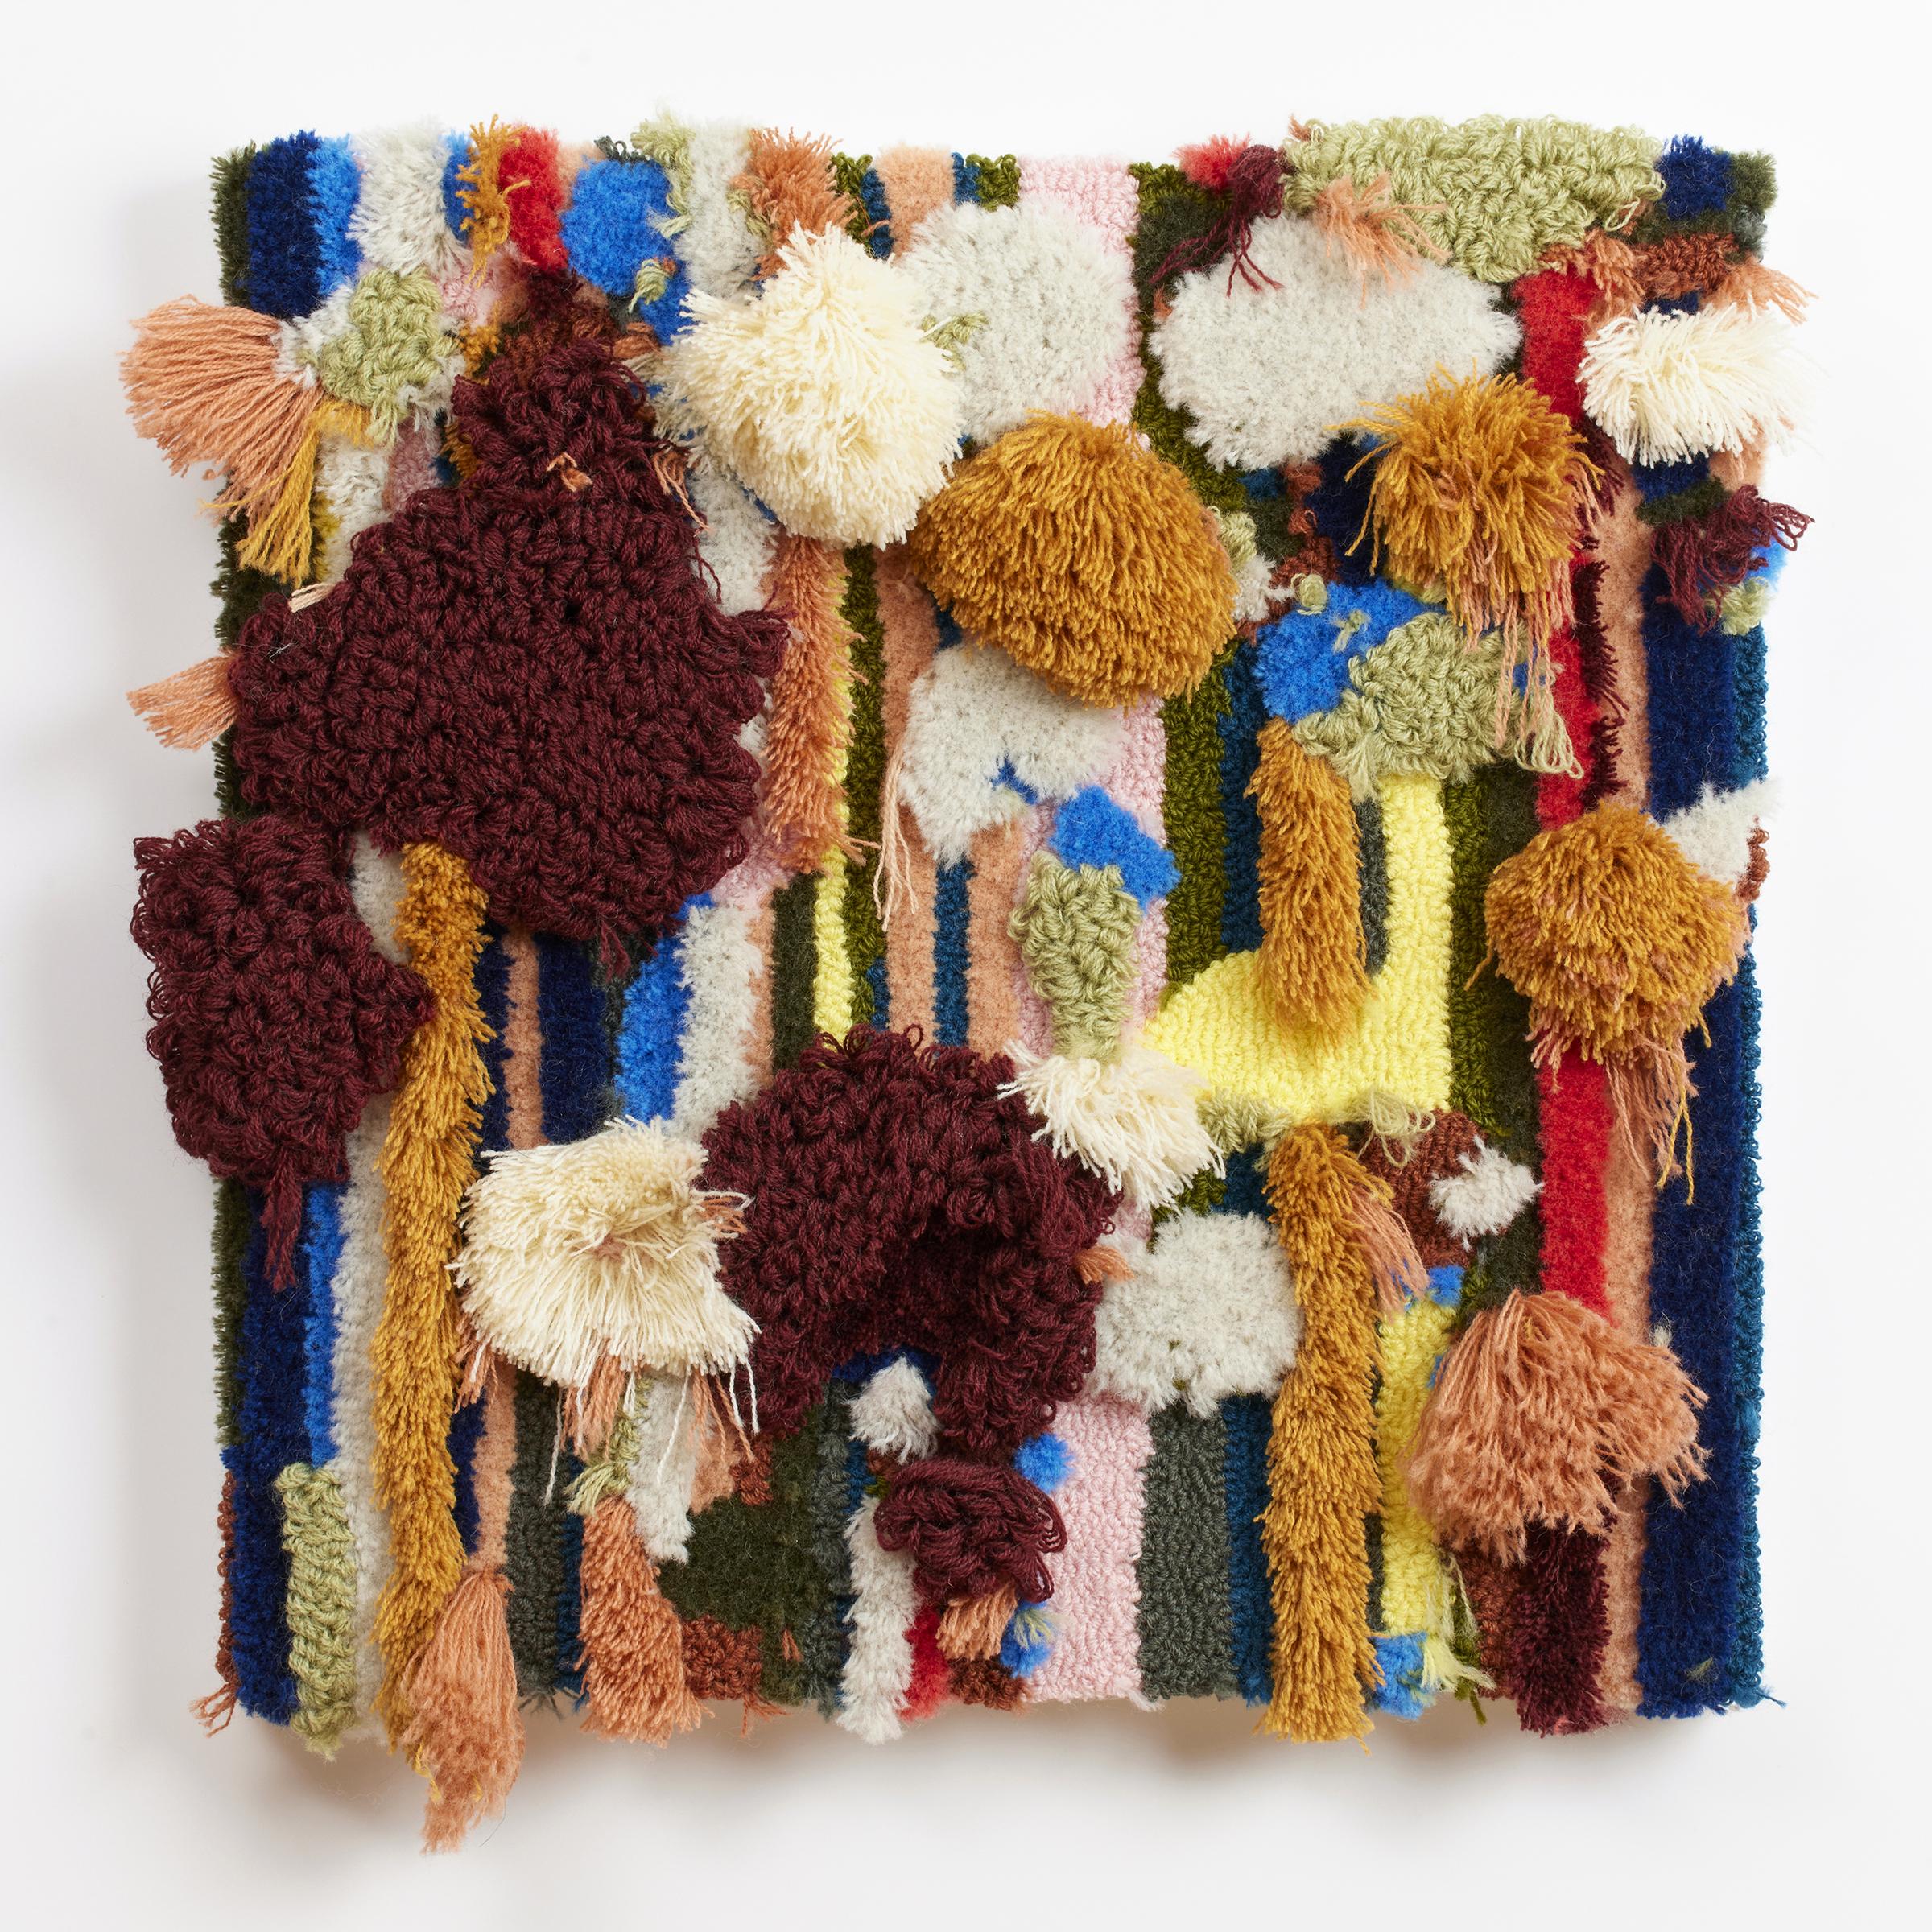 Trish Andersen Abstract Sculpture - 'A Tisket, A Tasket' - contemporary fiber art, textural, colorful, tufting